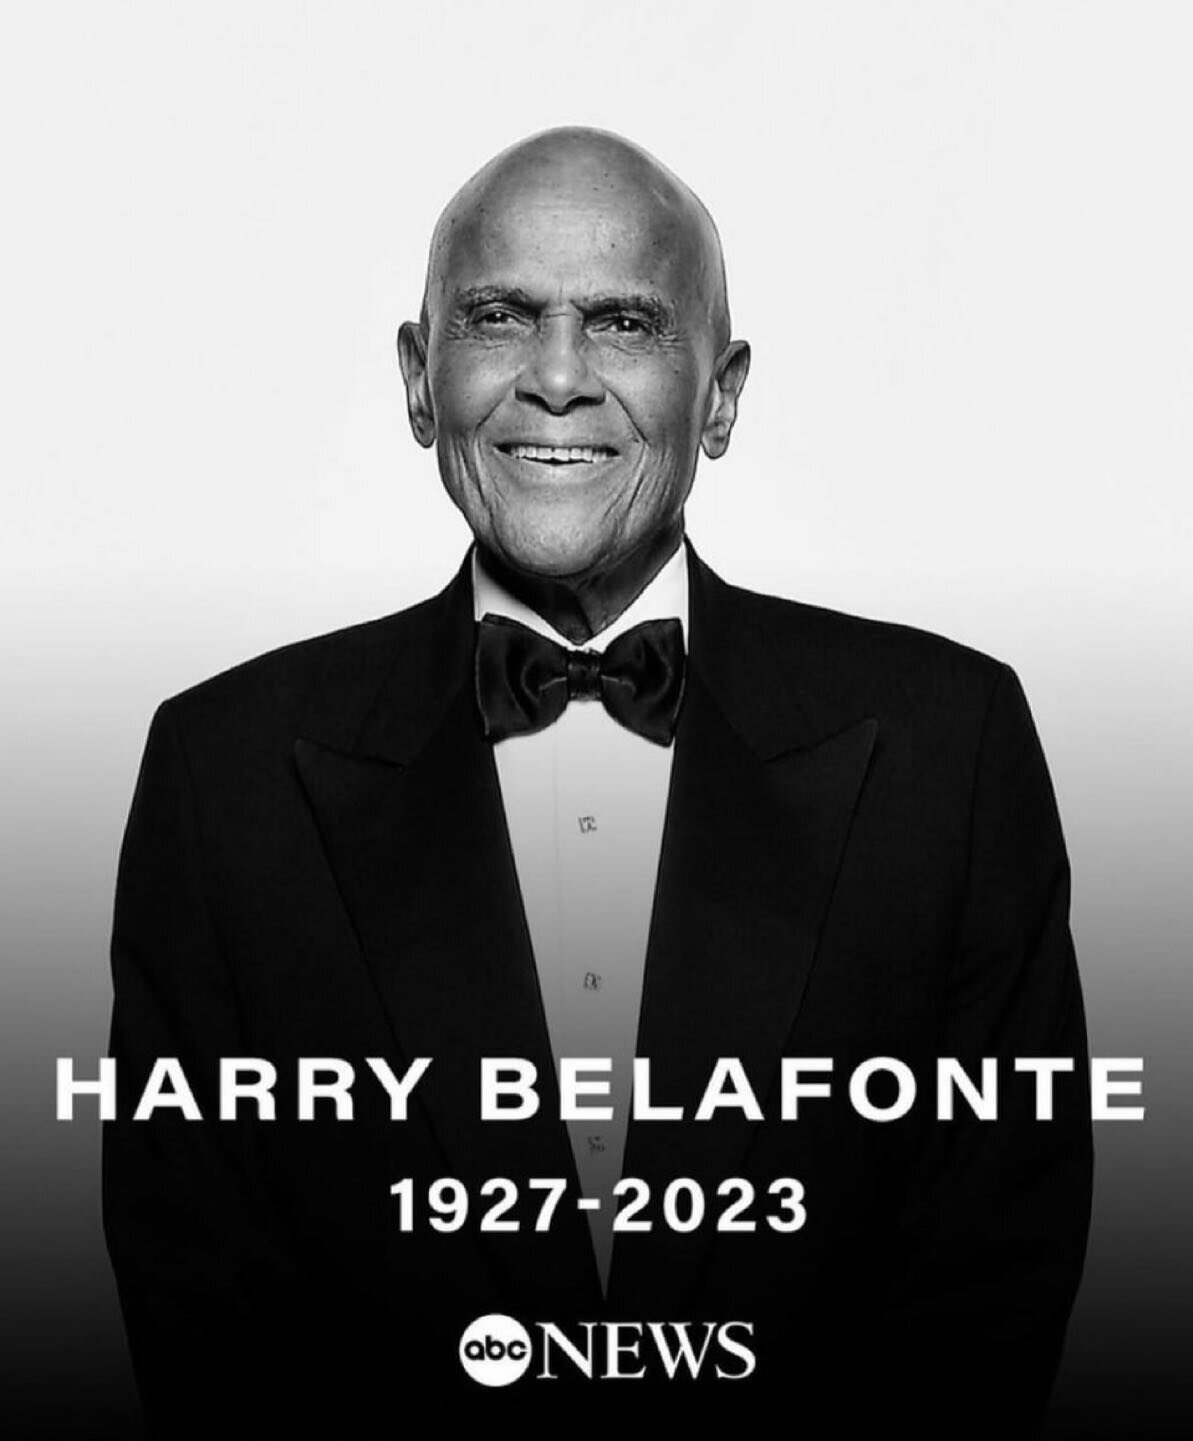 Simply put, #HarryBelafonte is one of the most pivotal figures in Black history. Whether it was through entertainment or activism, he was a true catalyst for societal change. #legend #icon